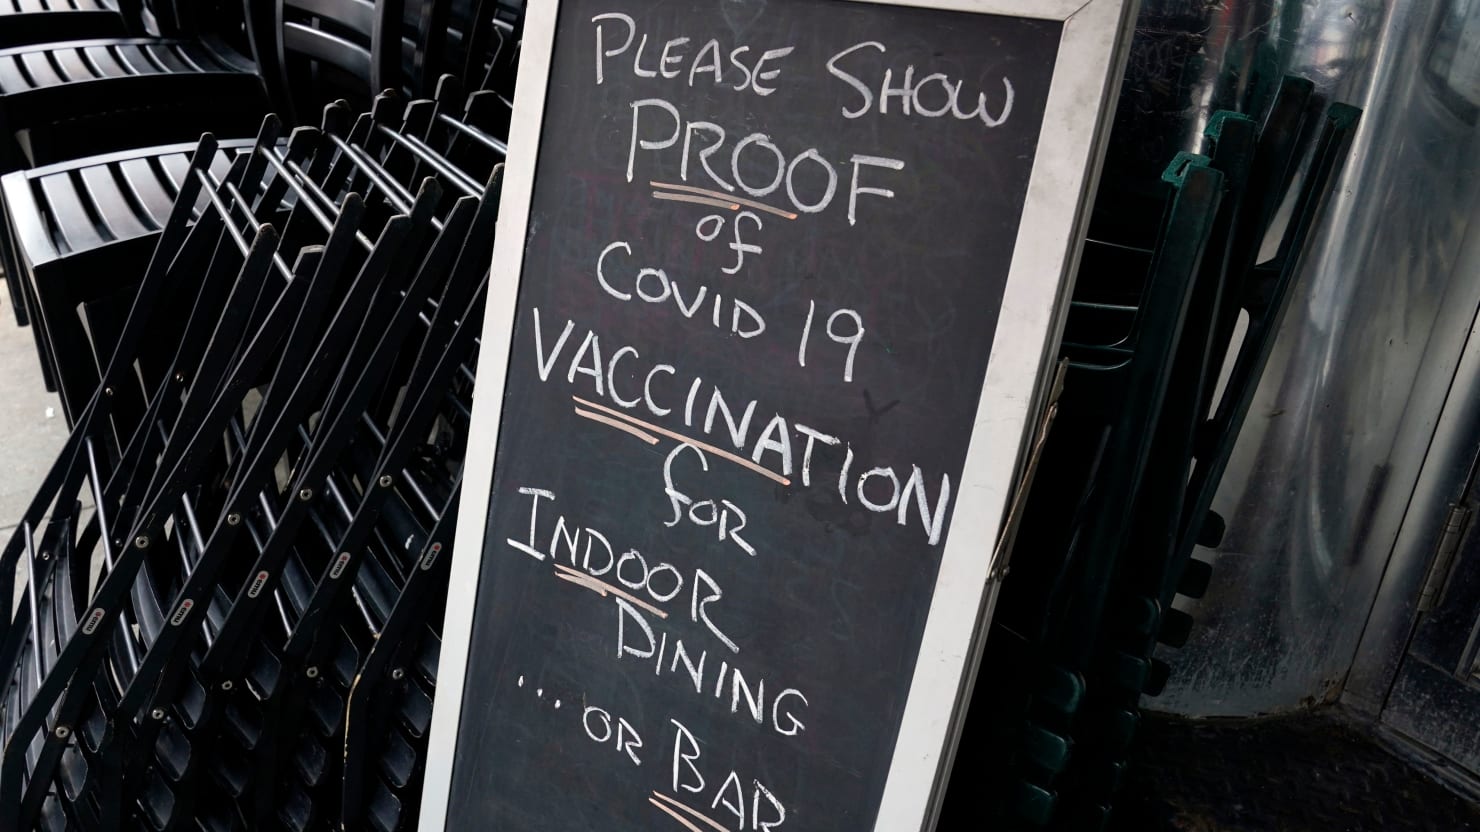 Los Angeles Now Has One of the Strictest Vaccine Mandates